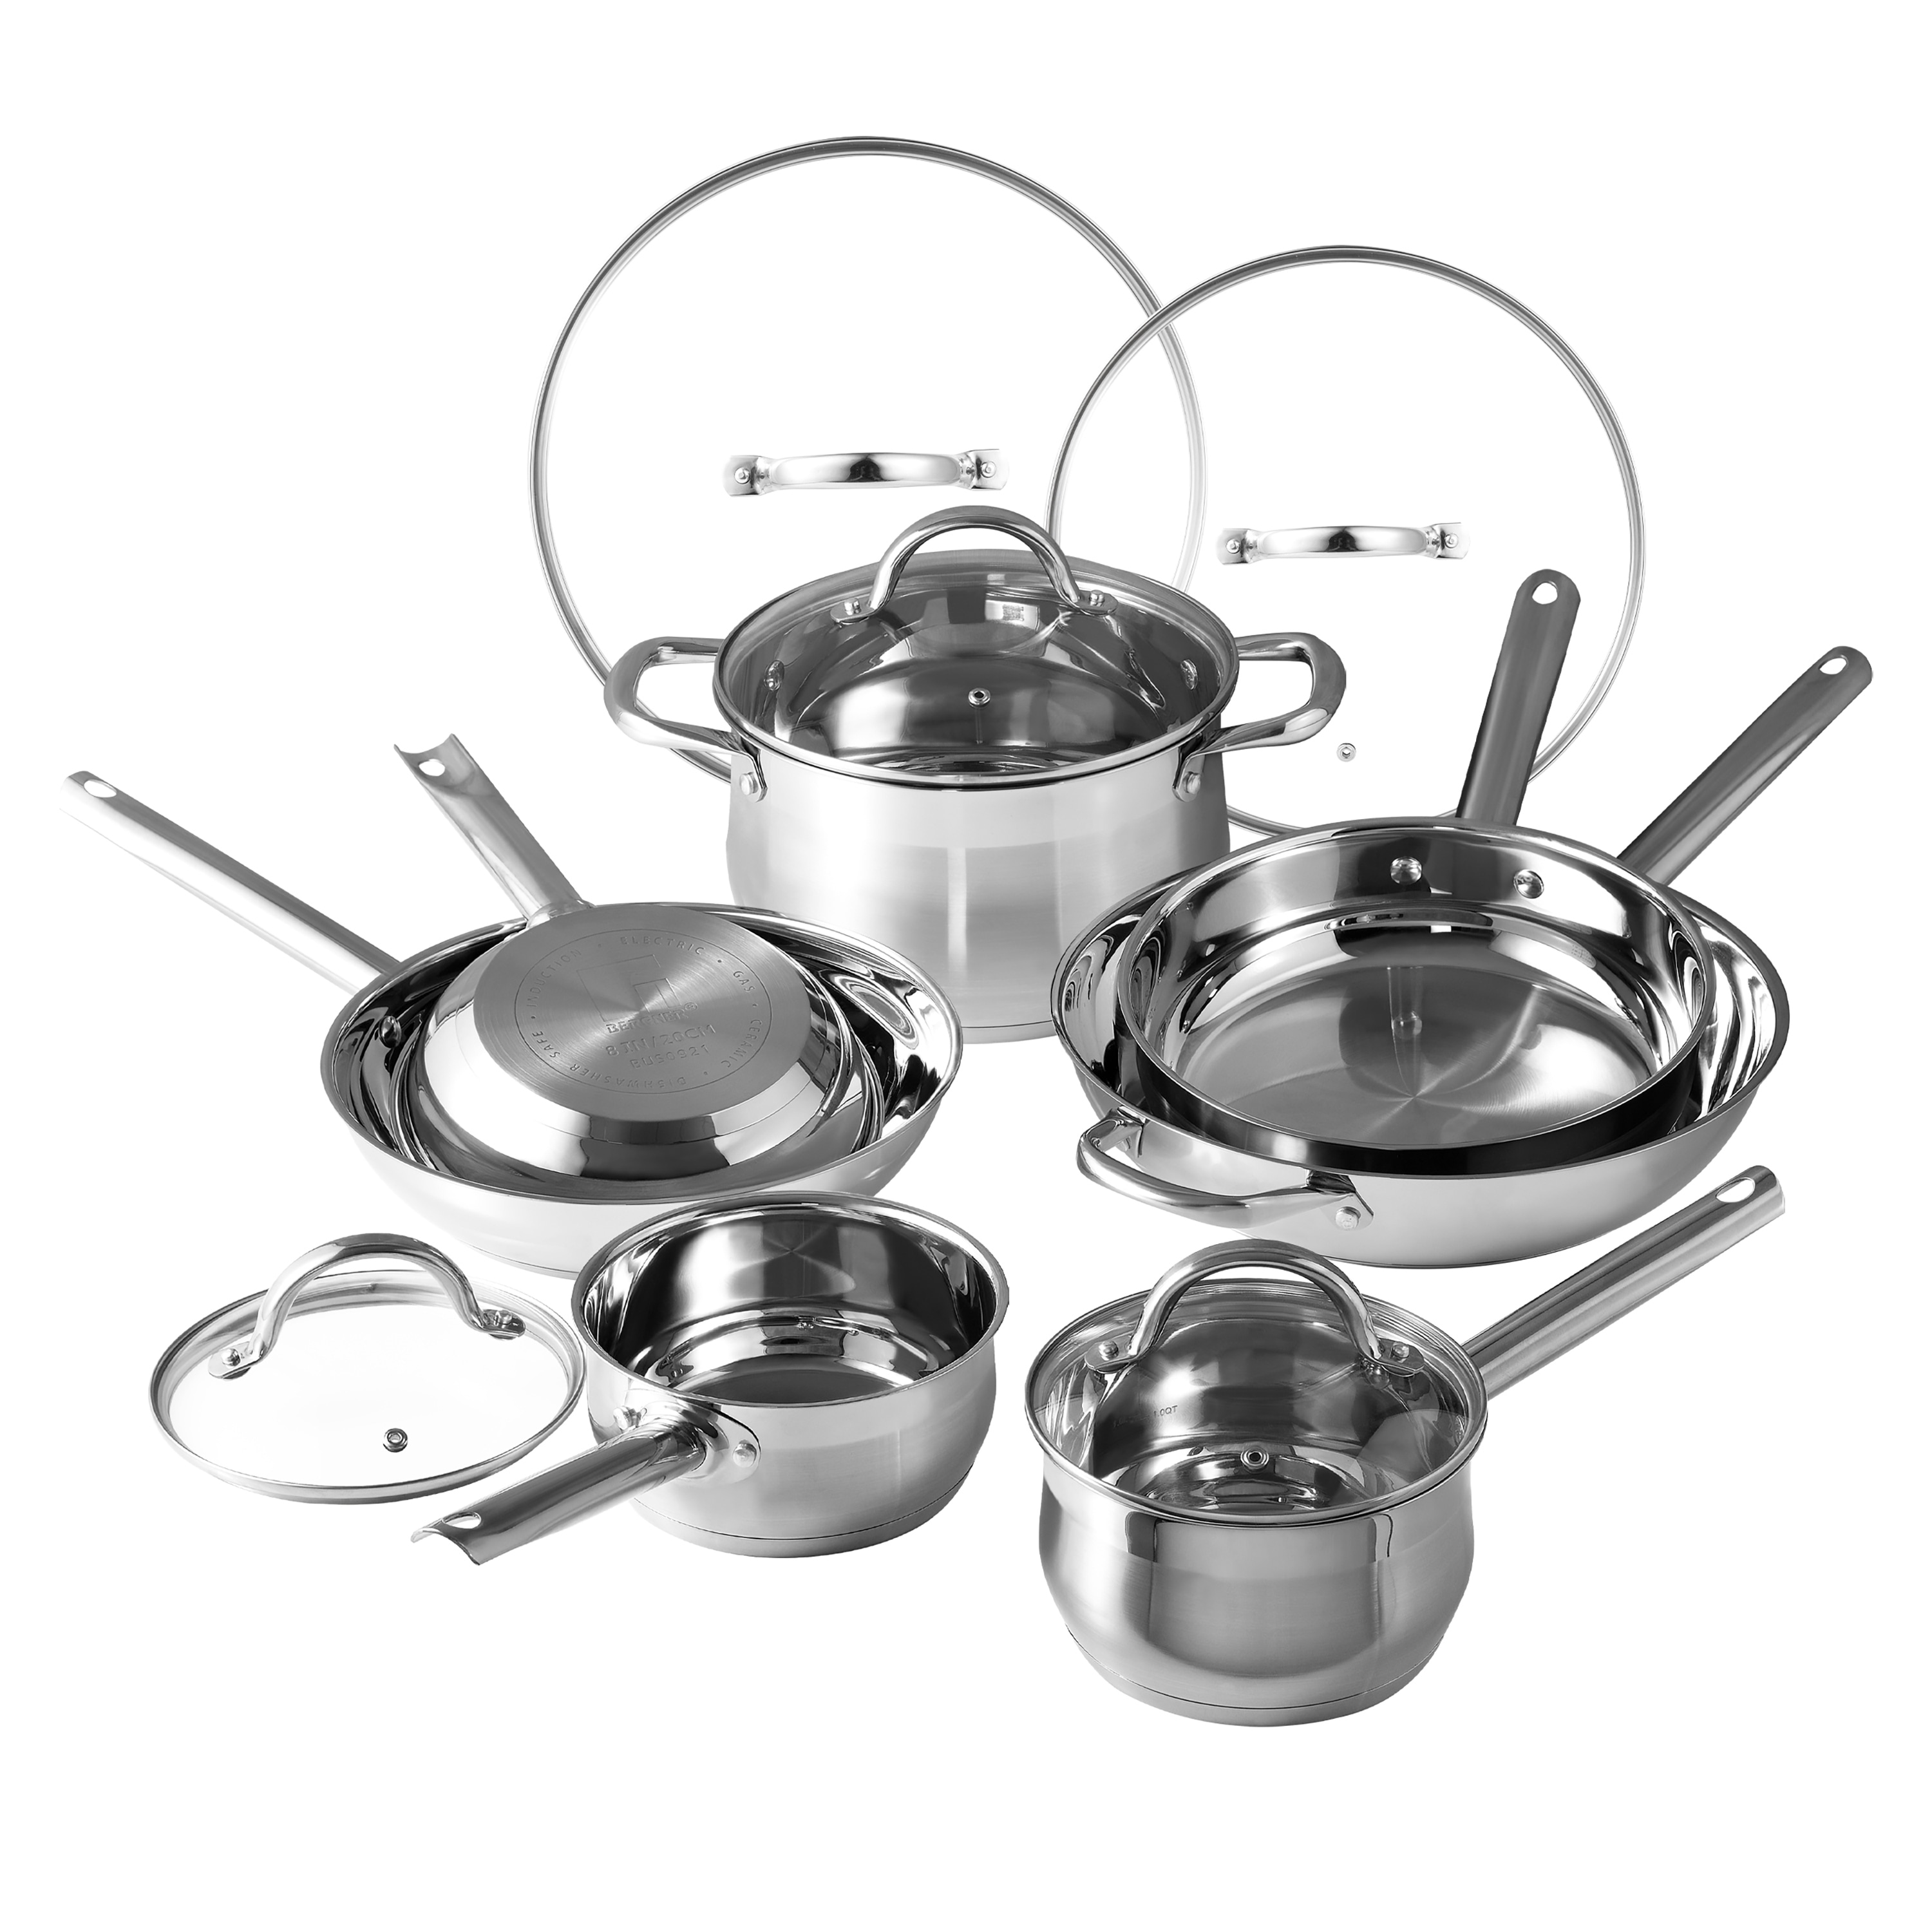 New Bergner Cookware 6 Piece 3-Ply Stainless Steel Clad Induction Gas  Electric